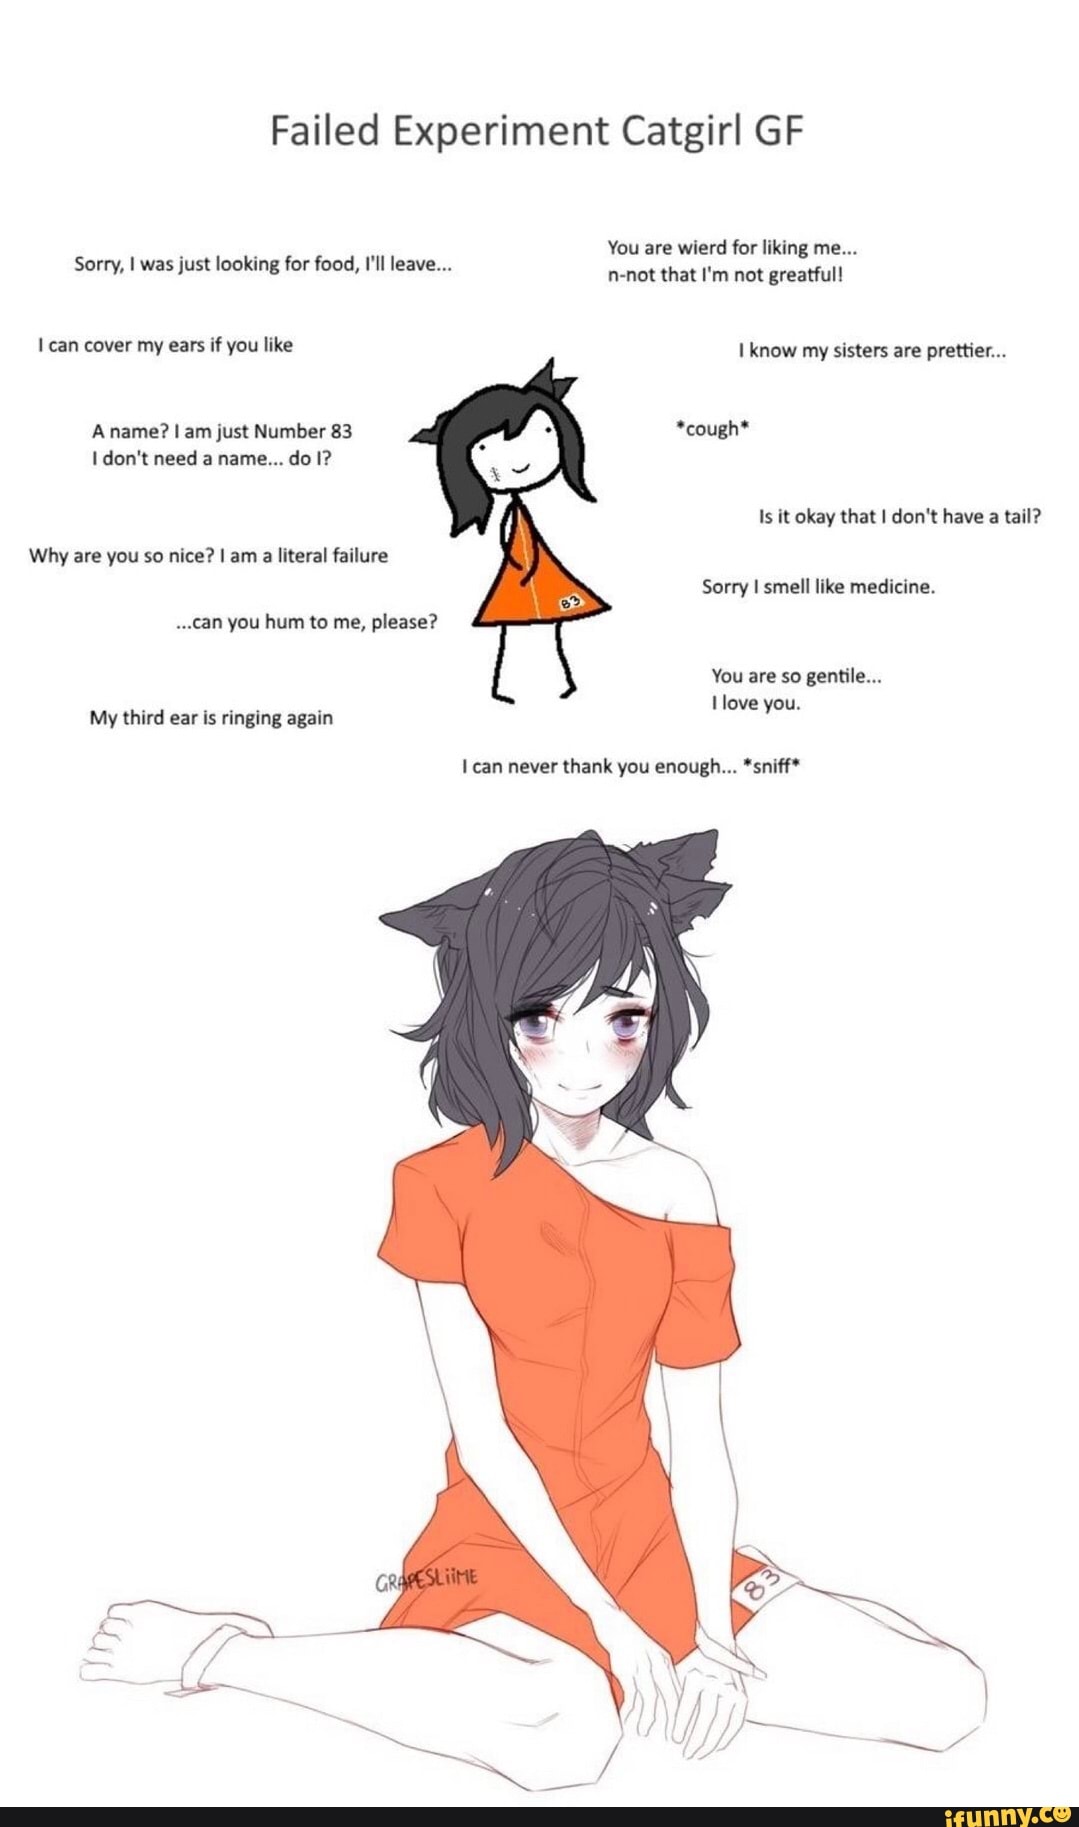 Would you fuck a catgirl? Why/why not? : r/AskReddit